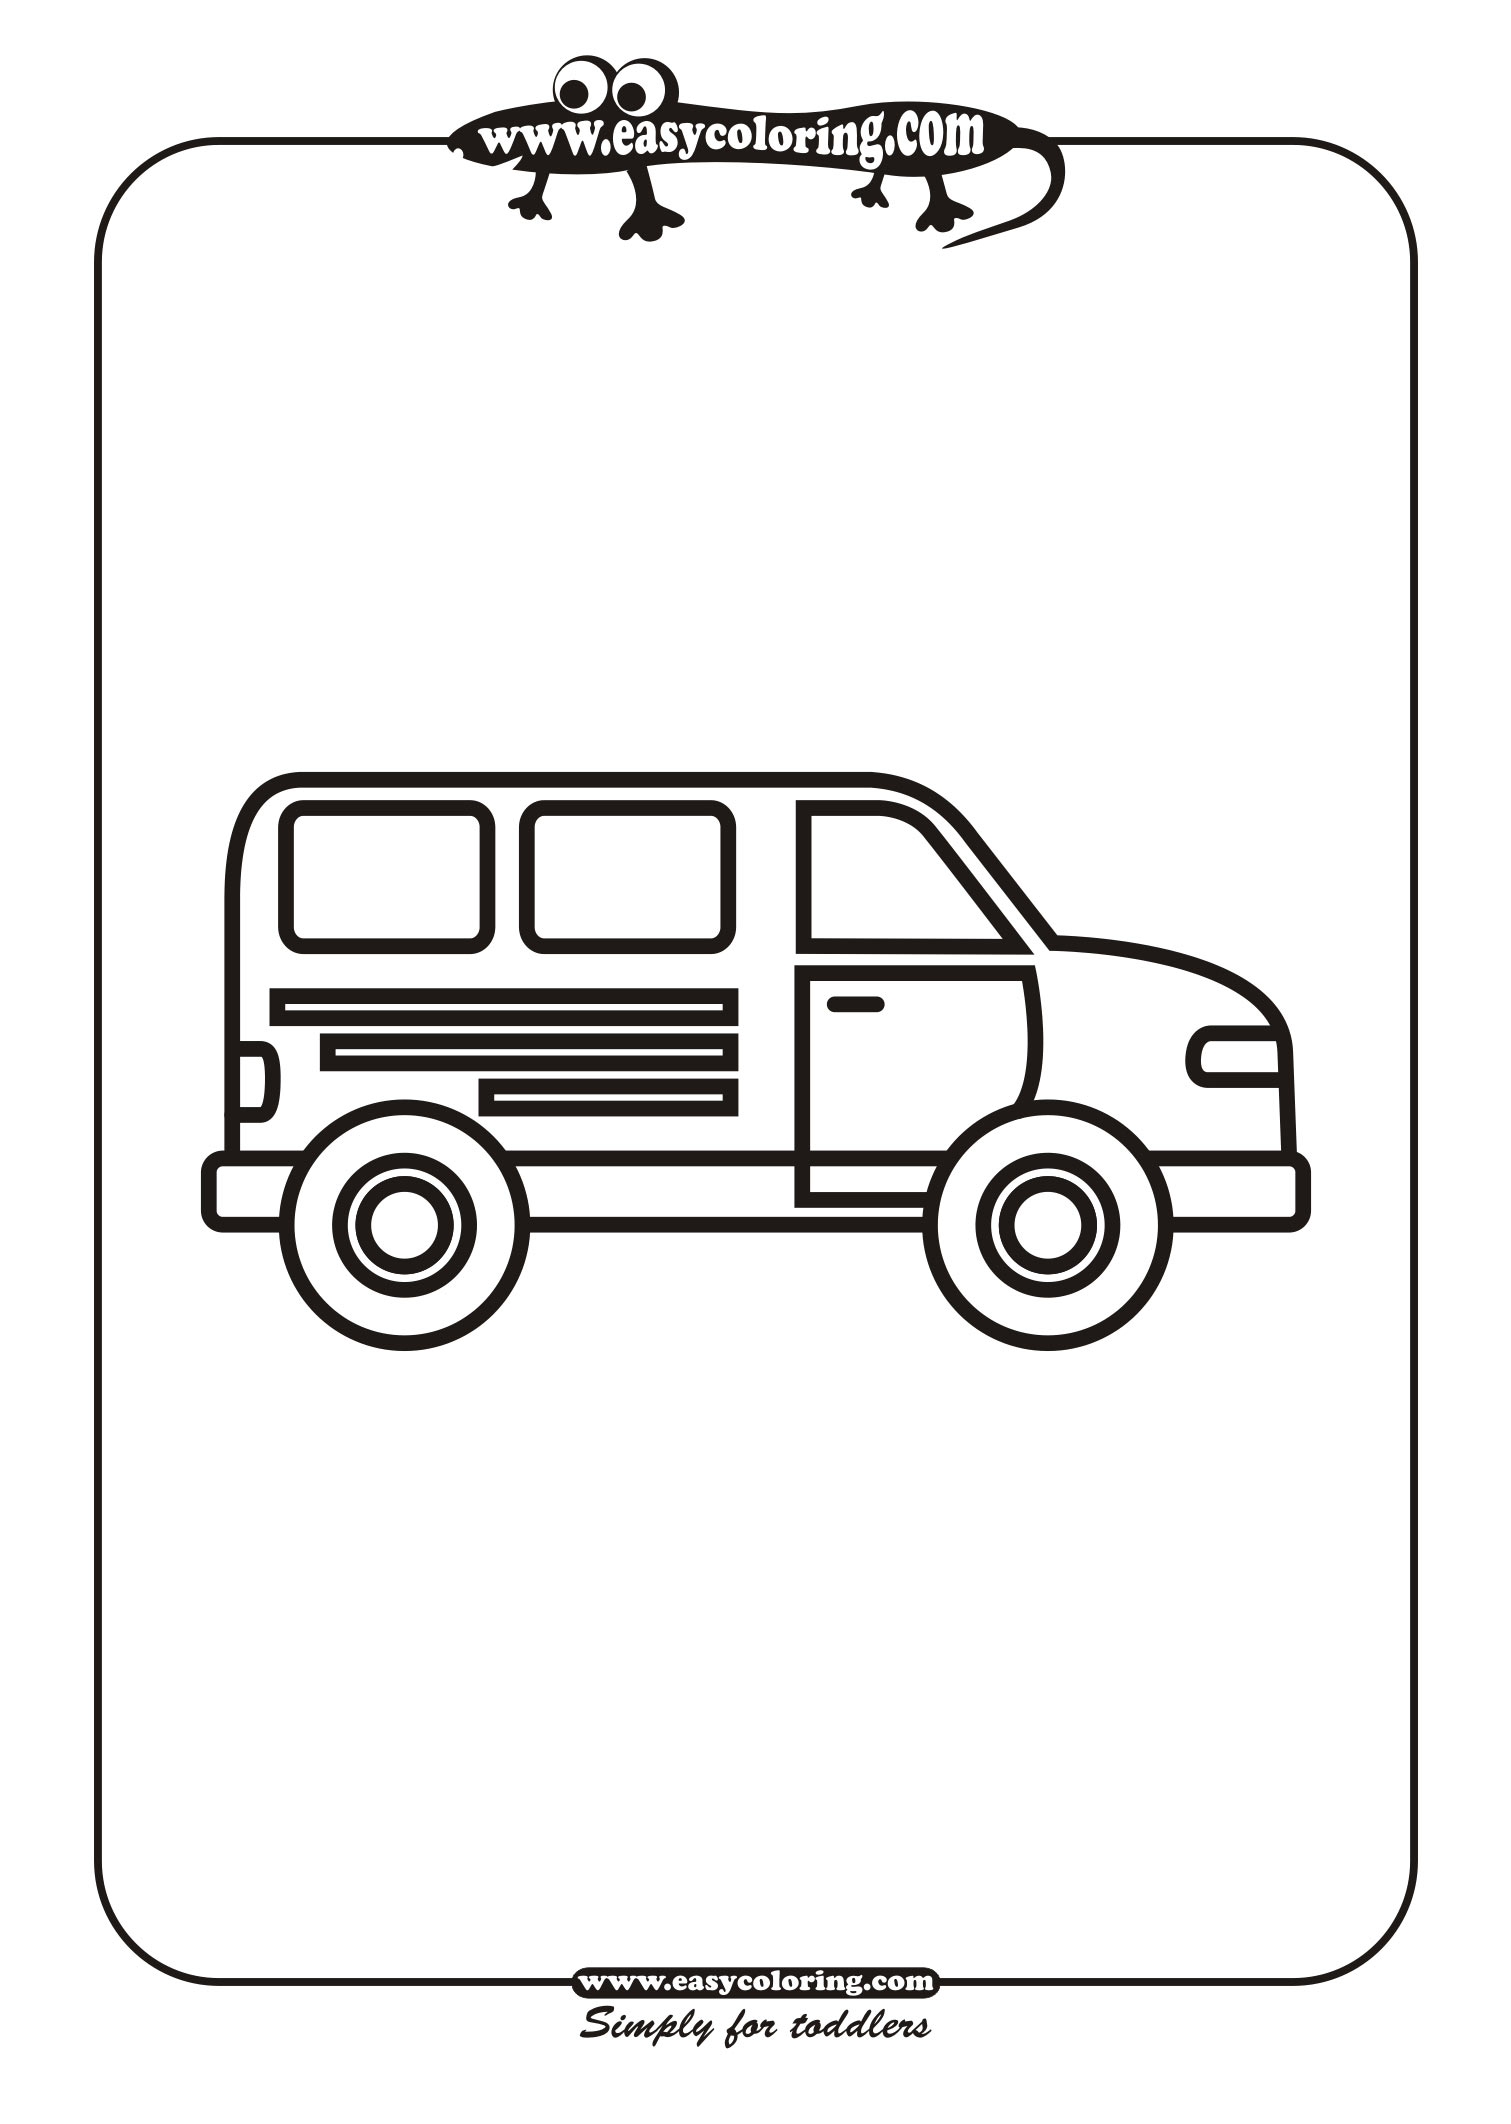 car coloring pages easy - photo #32